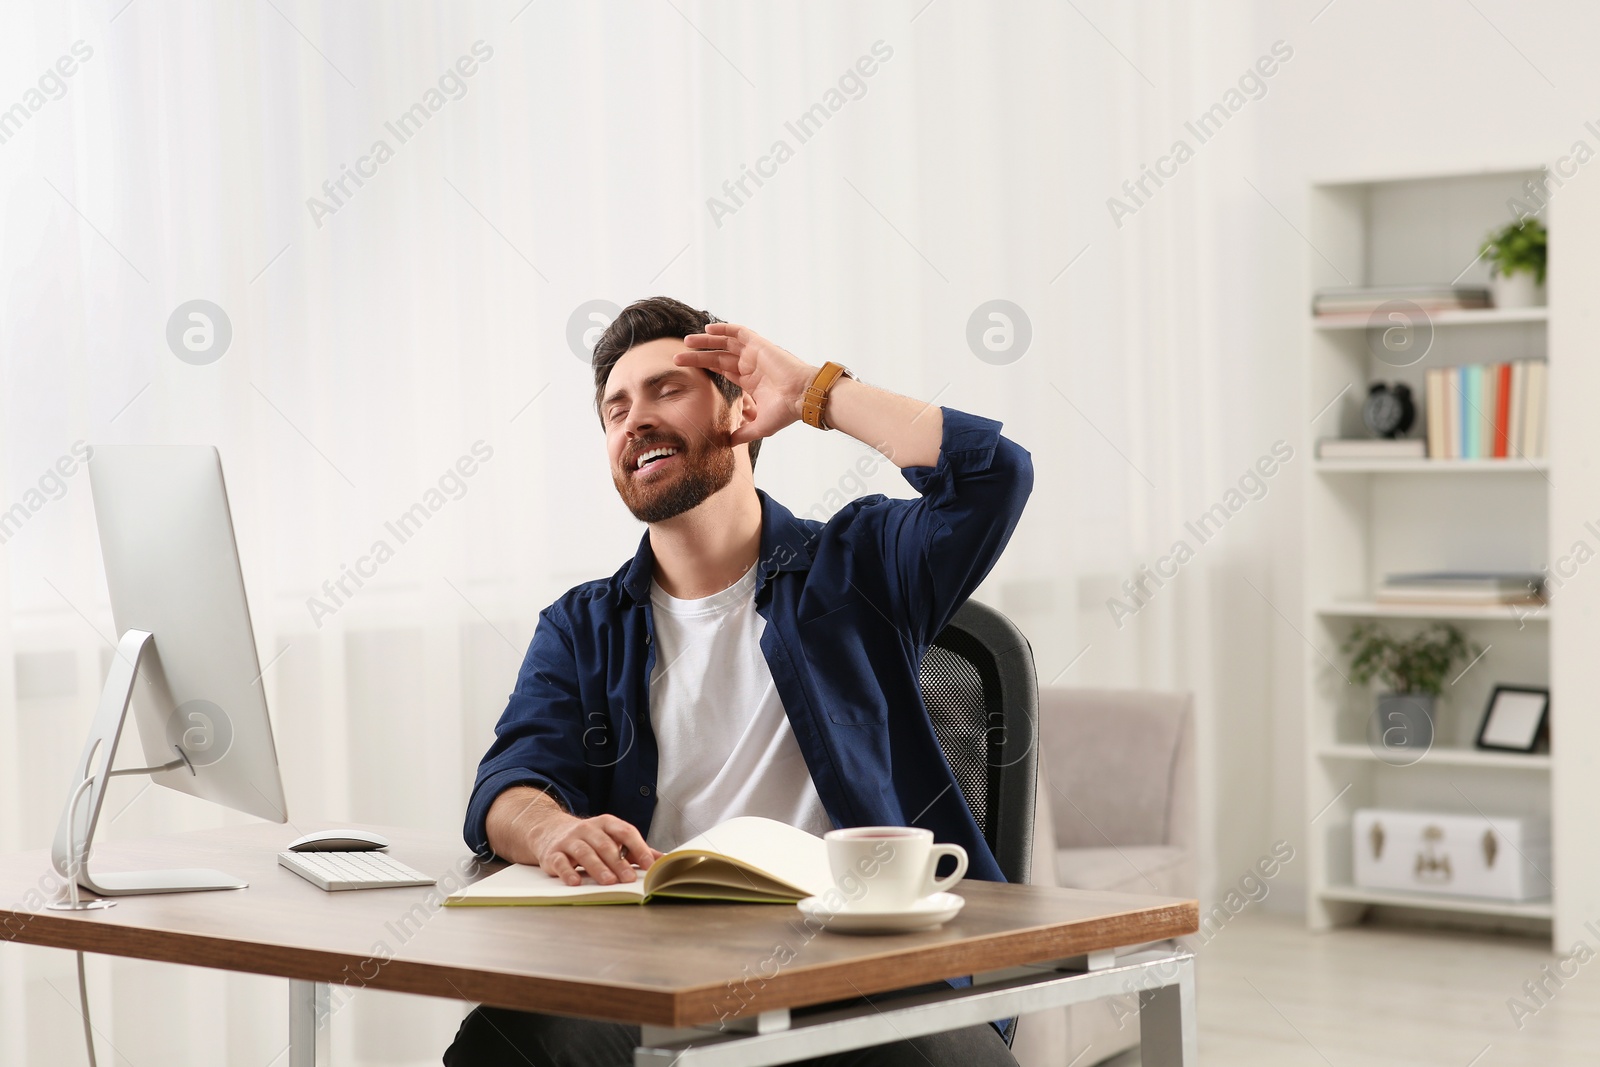 Photo of Home workplace. Emotional man working with computer at wooden desk in room